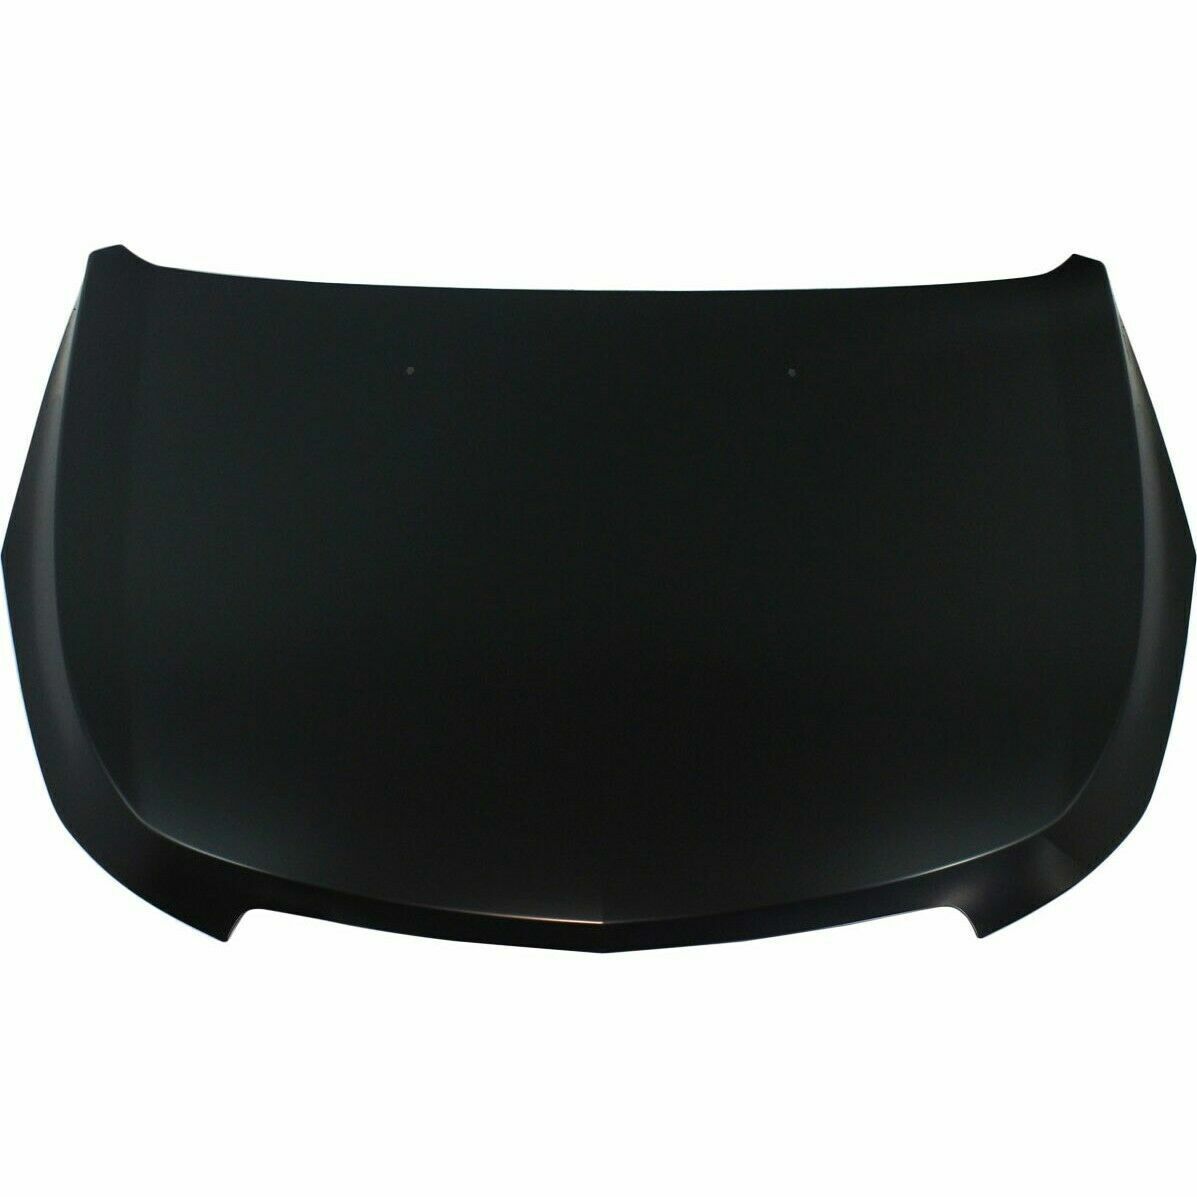 2011-2015 CHEVY CRUZE Hood Painted to Match